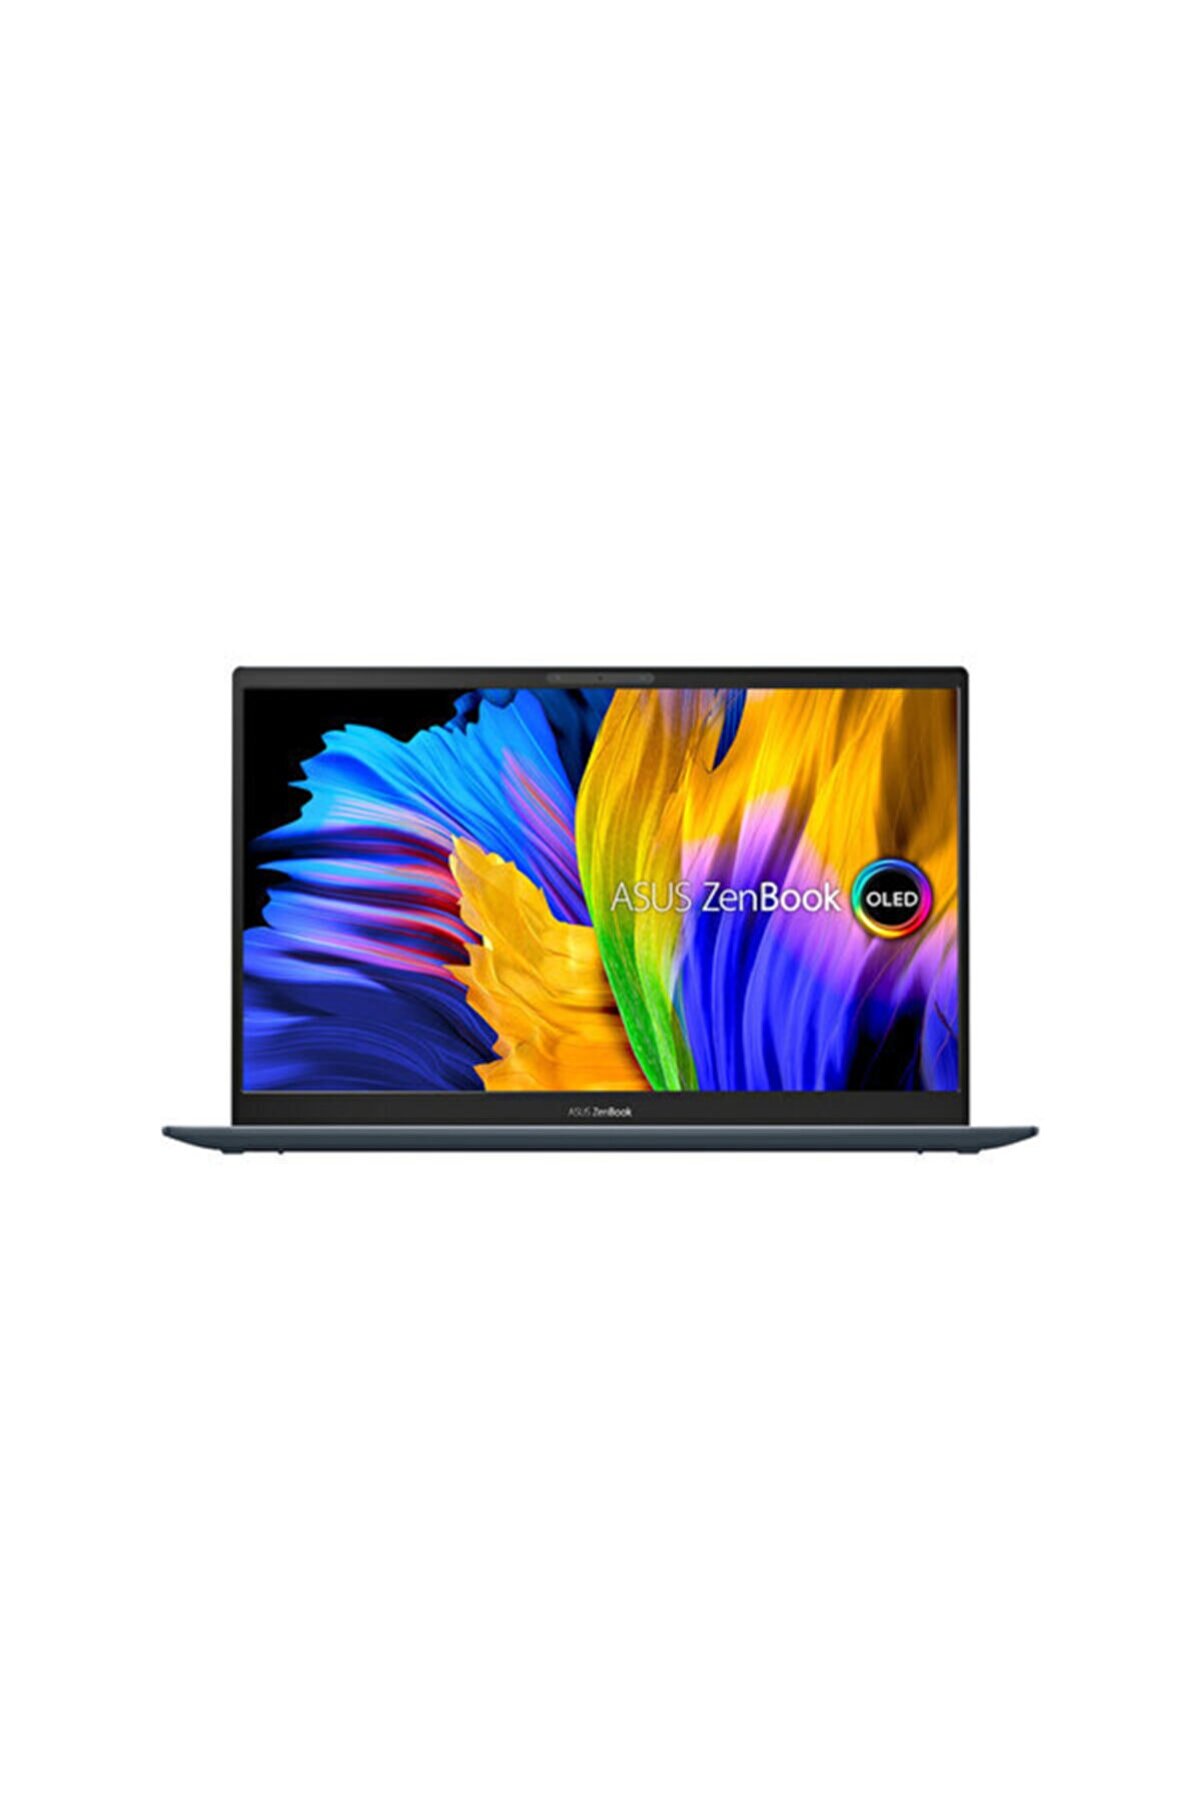 ASUS Zenbook 13 Ux325ea-kg239t Oled I7-1165g7 16gb Ram 1tb Ssd 13" Win10 Numberpad Notebook